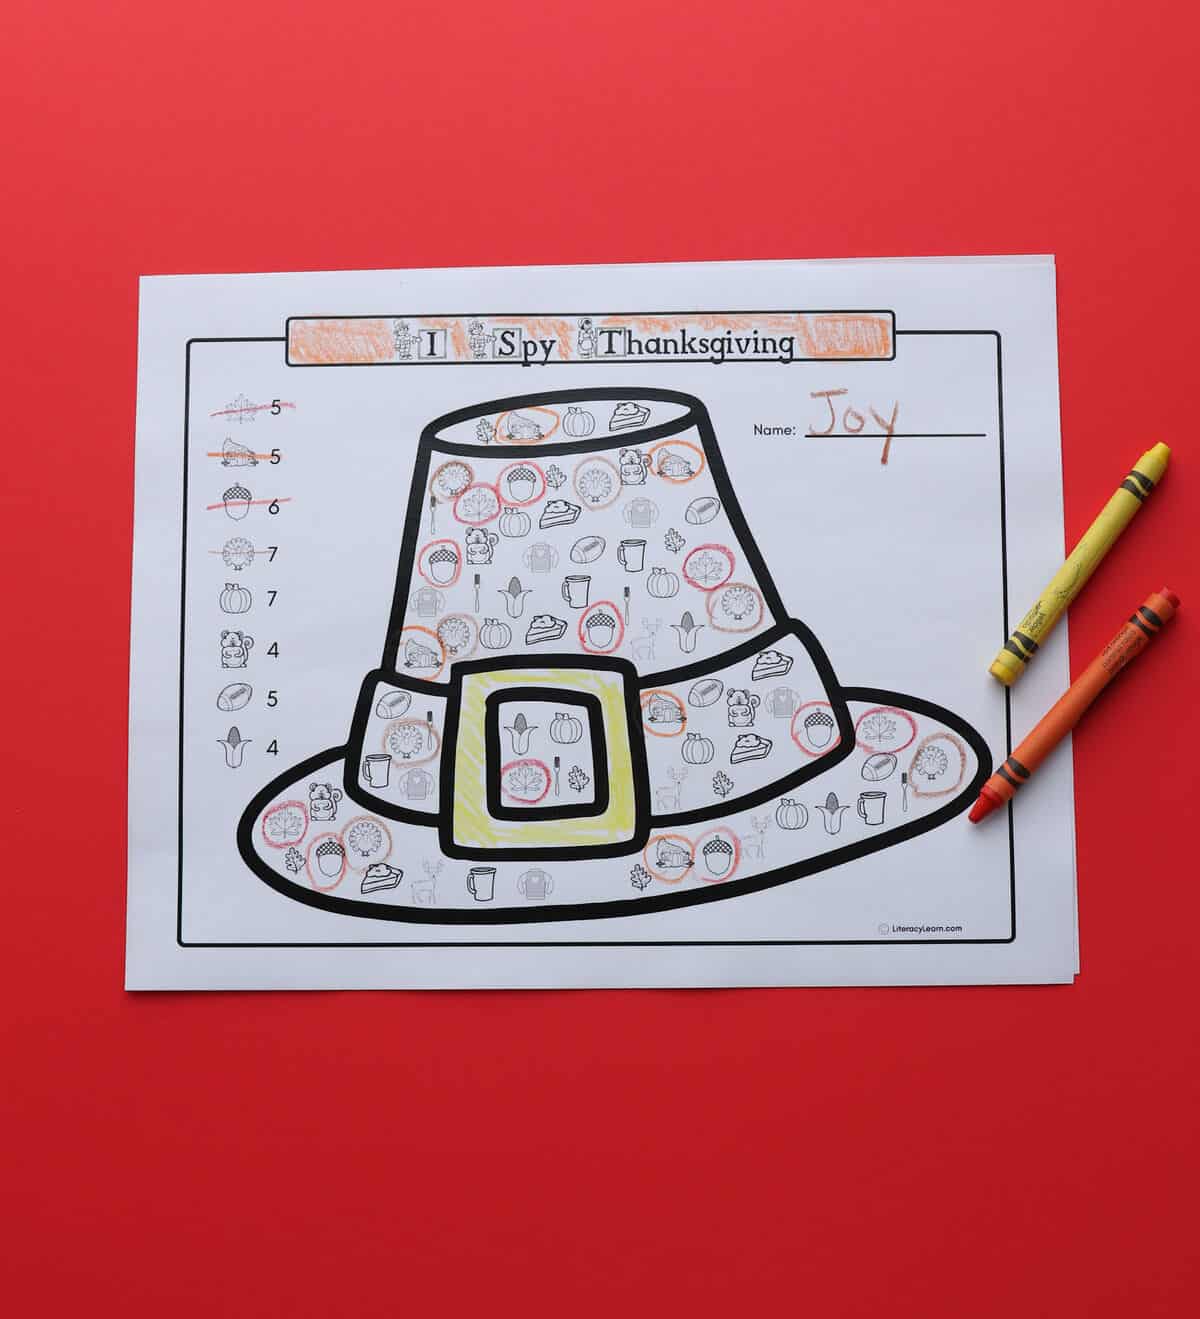 A printed I Spy Thanksgiving worksheet with crayons on a red background.